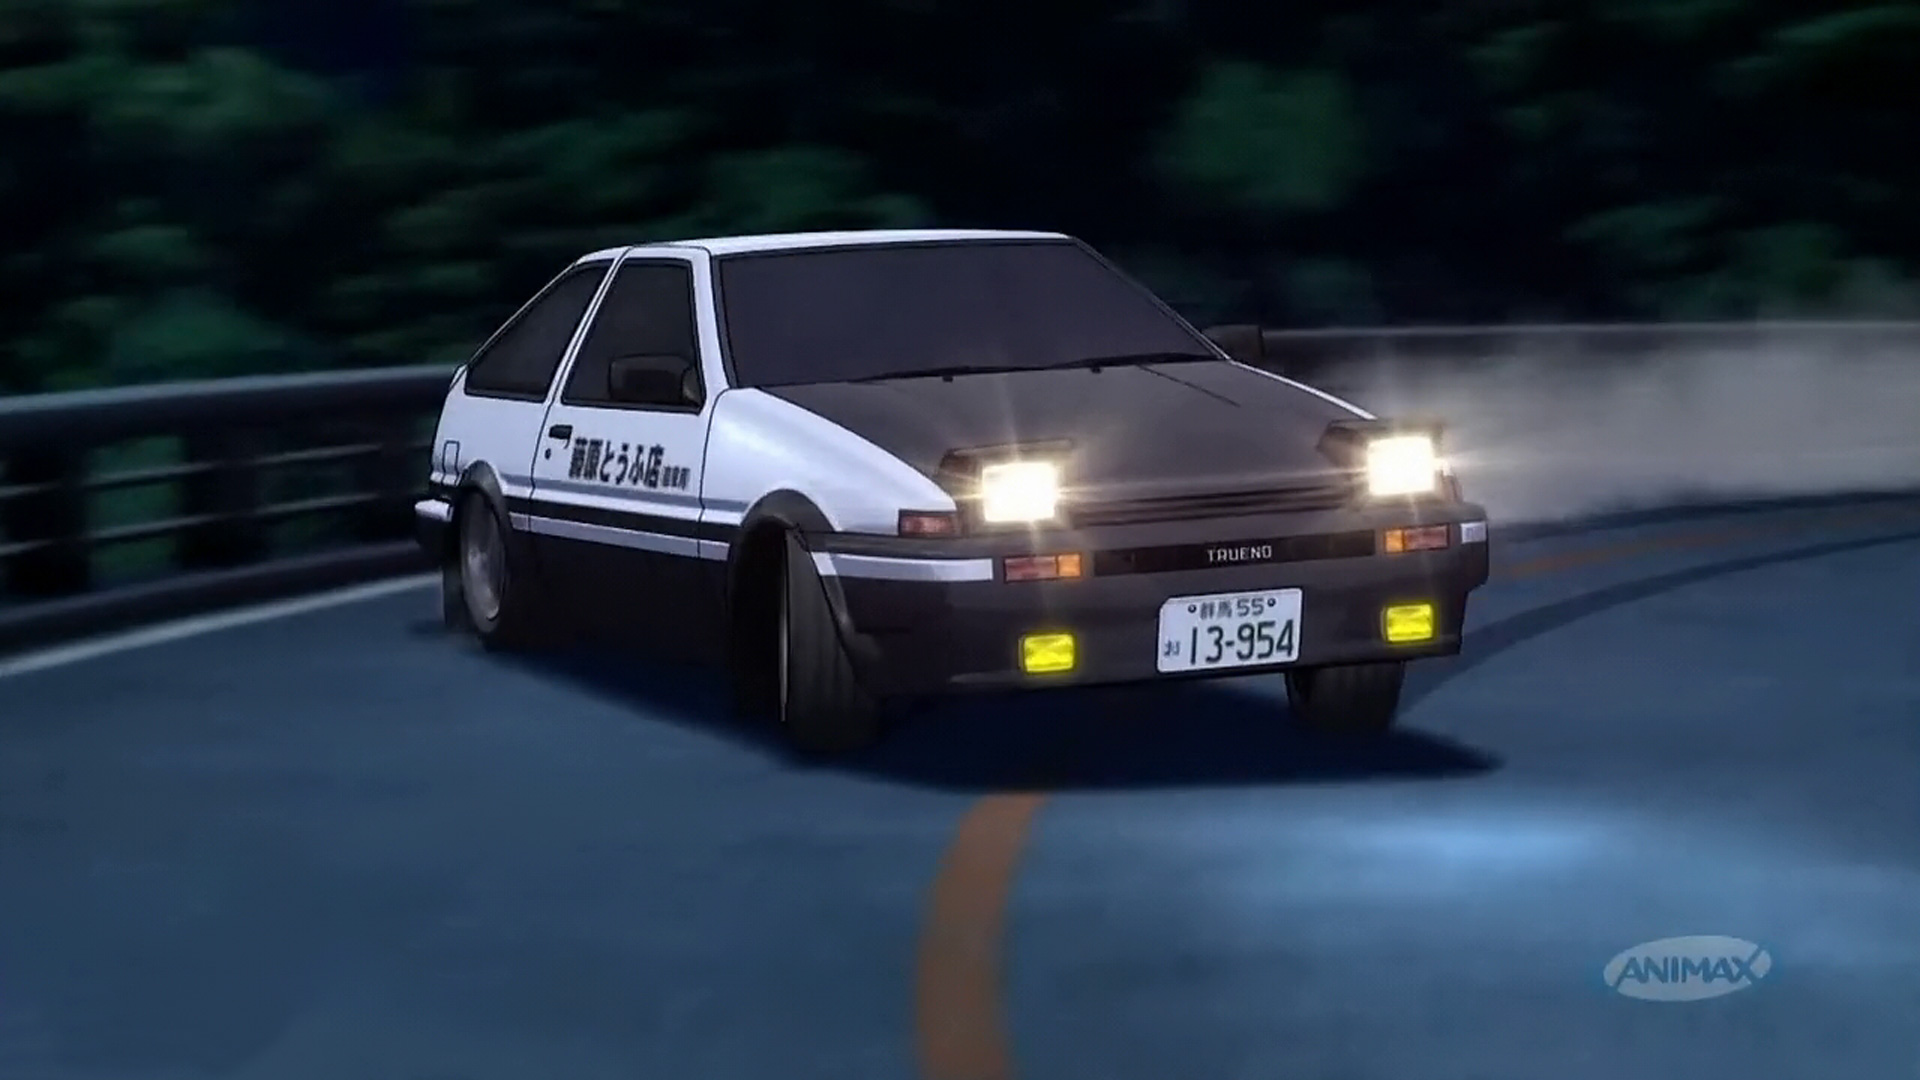 Lexica - Ae86 trueno JDM car , sticker, initial d anime style, solid  background color